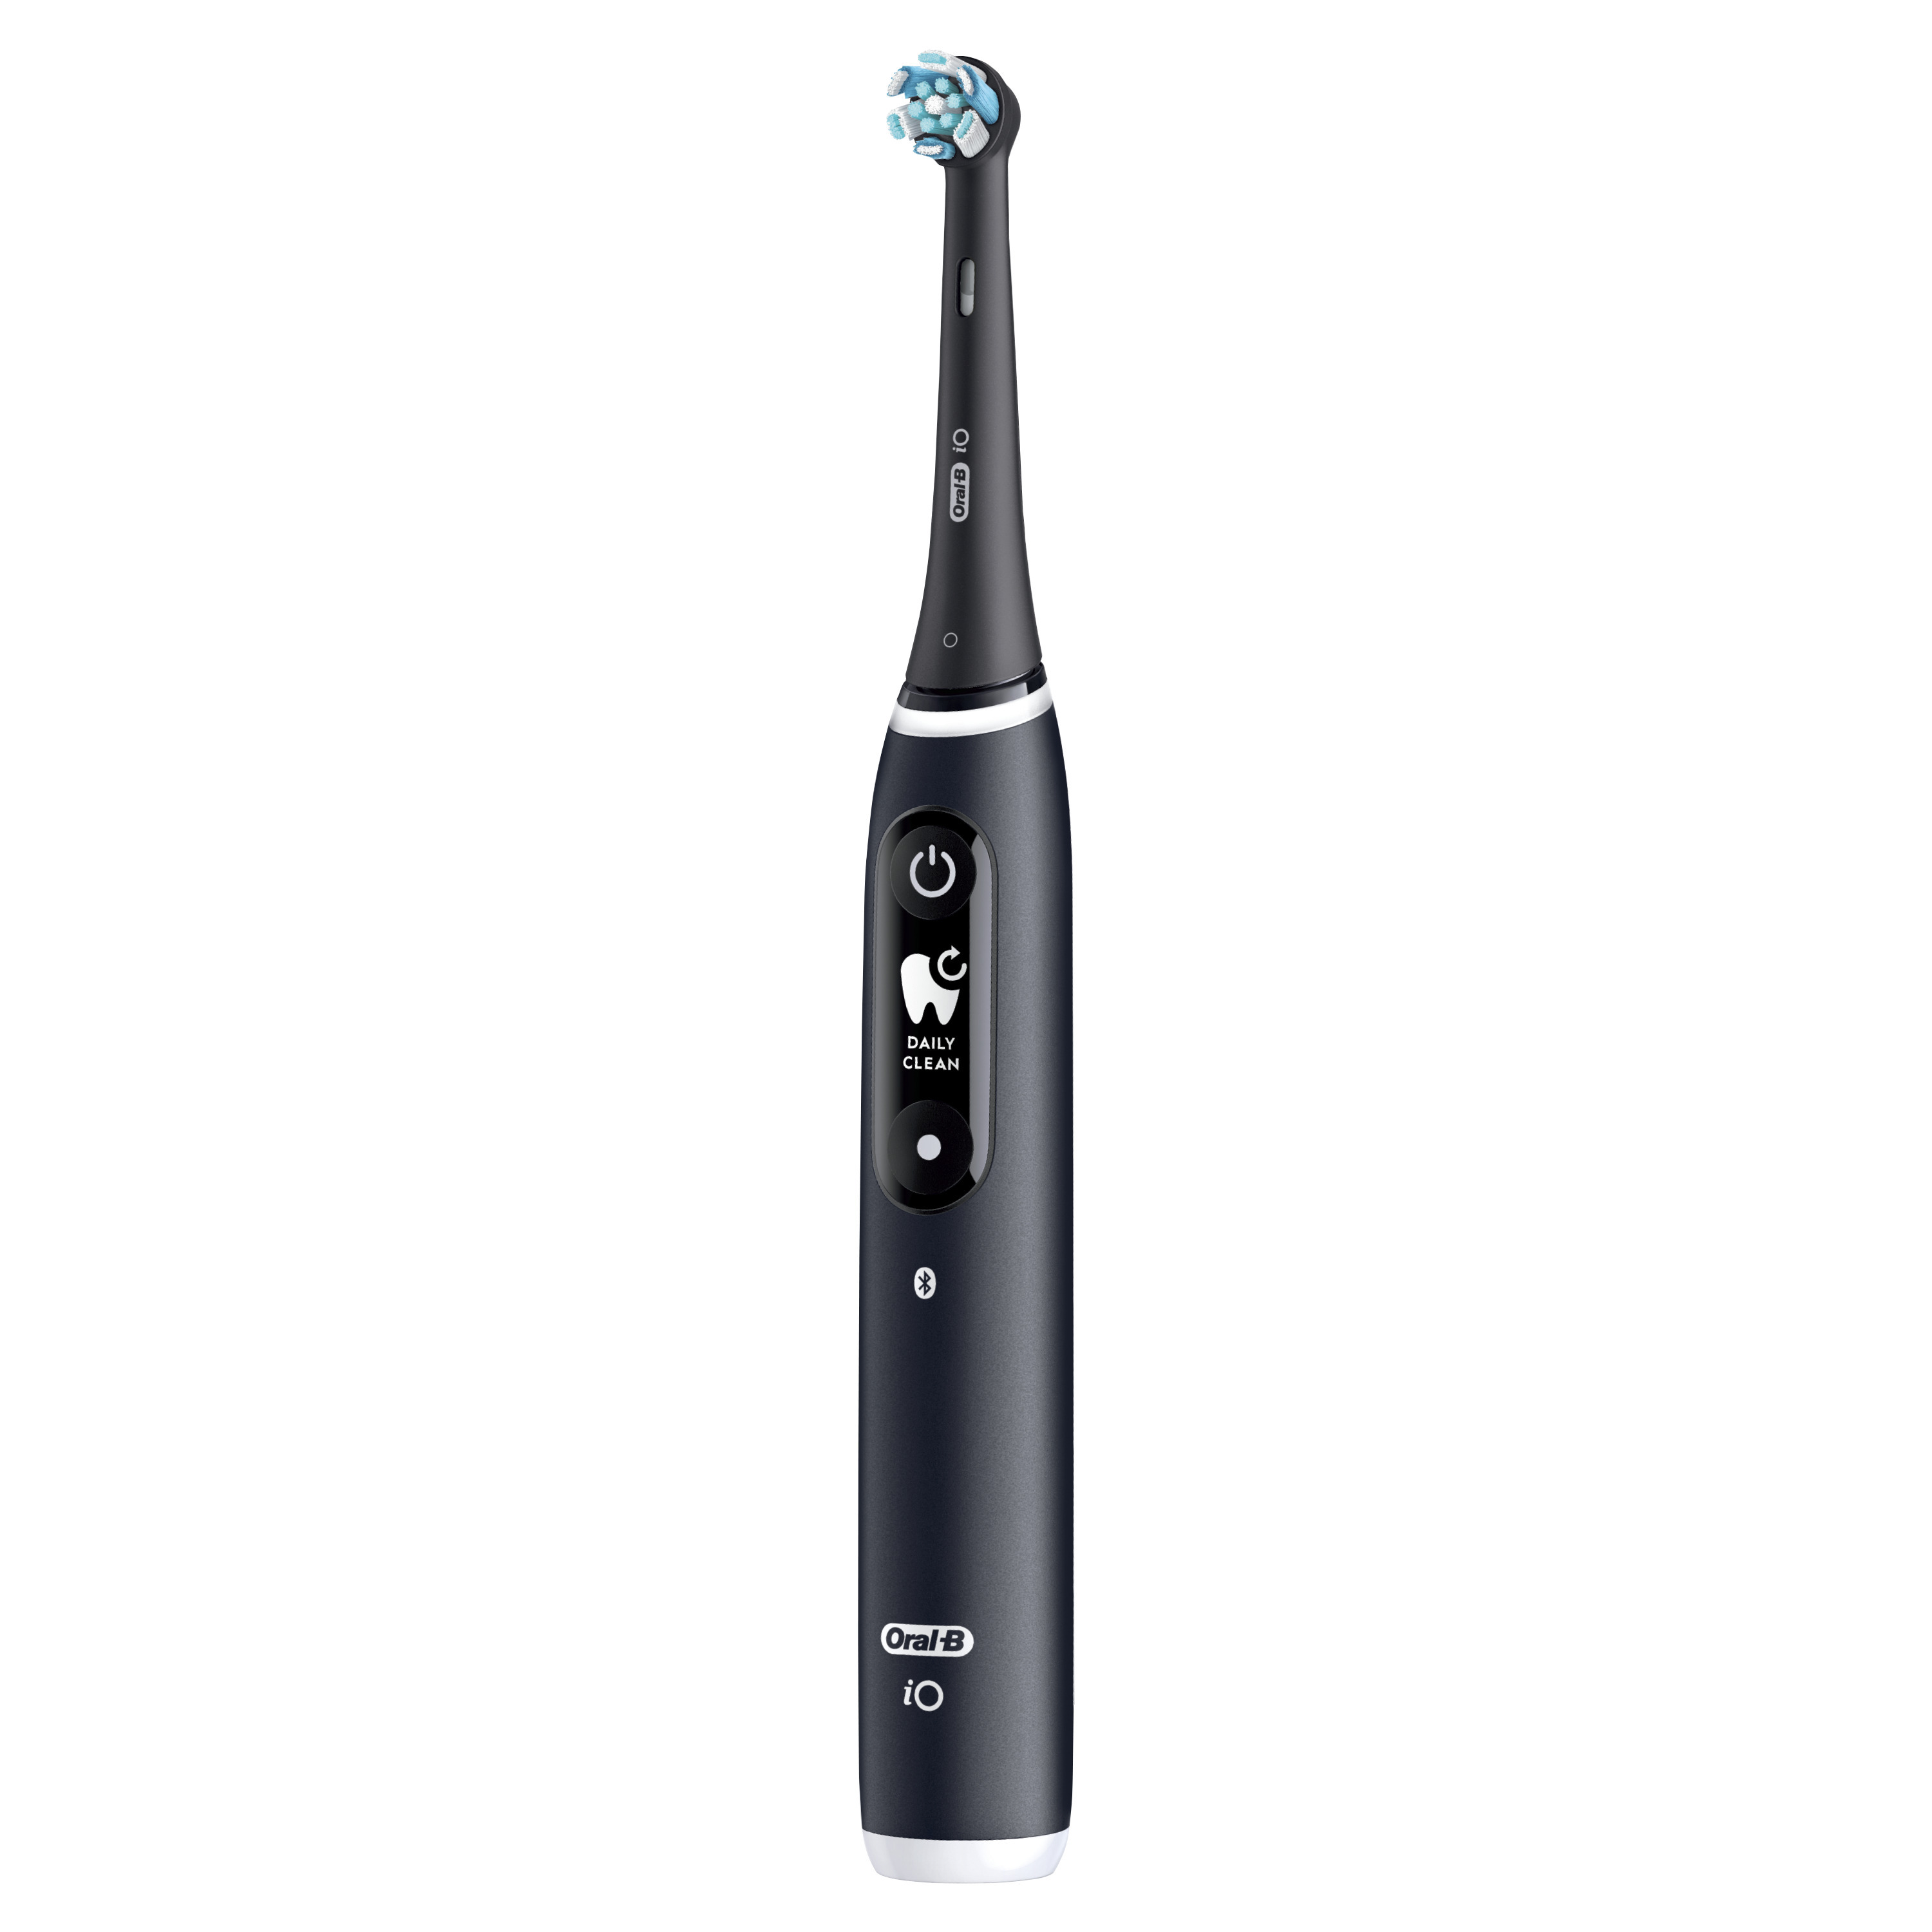 Oral-B iO Series 6 Electric Toothbrush with (1) Brush Head, Black Lava, for Adults & Children 3+ - image 3 of 11